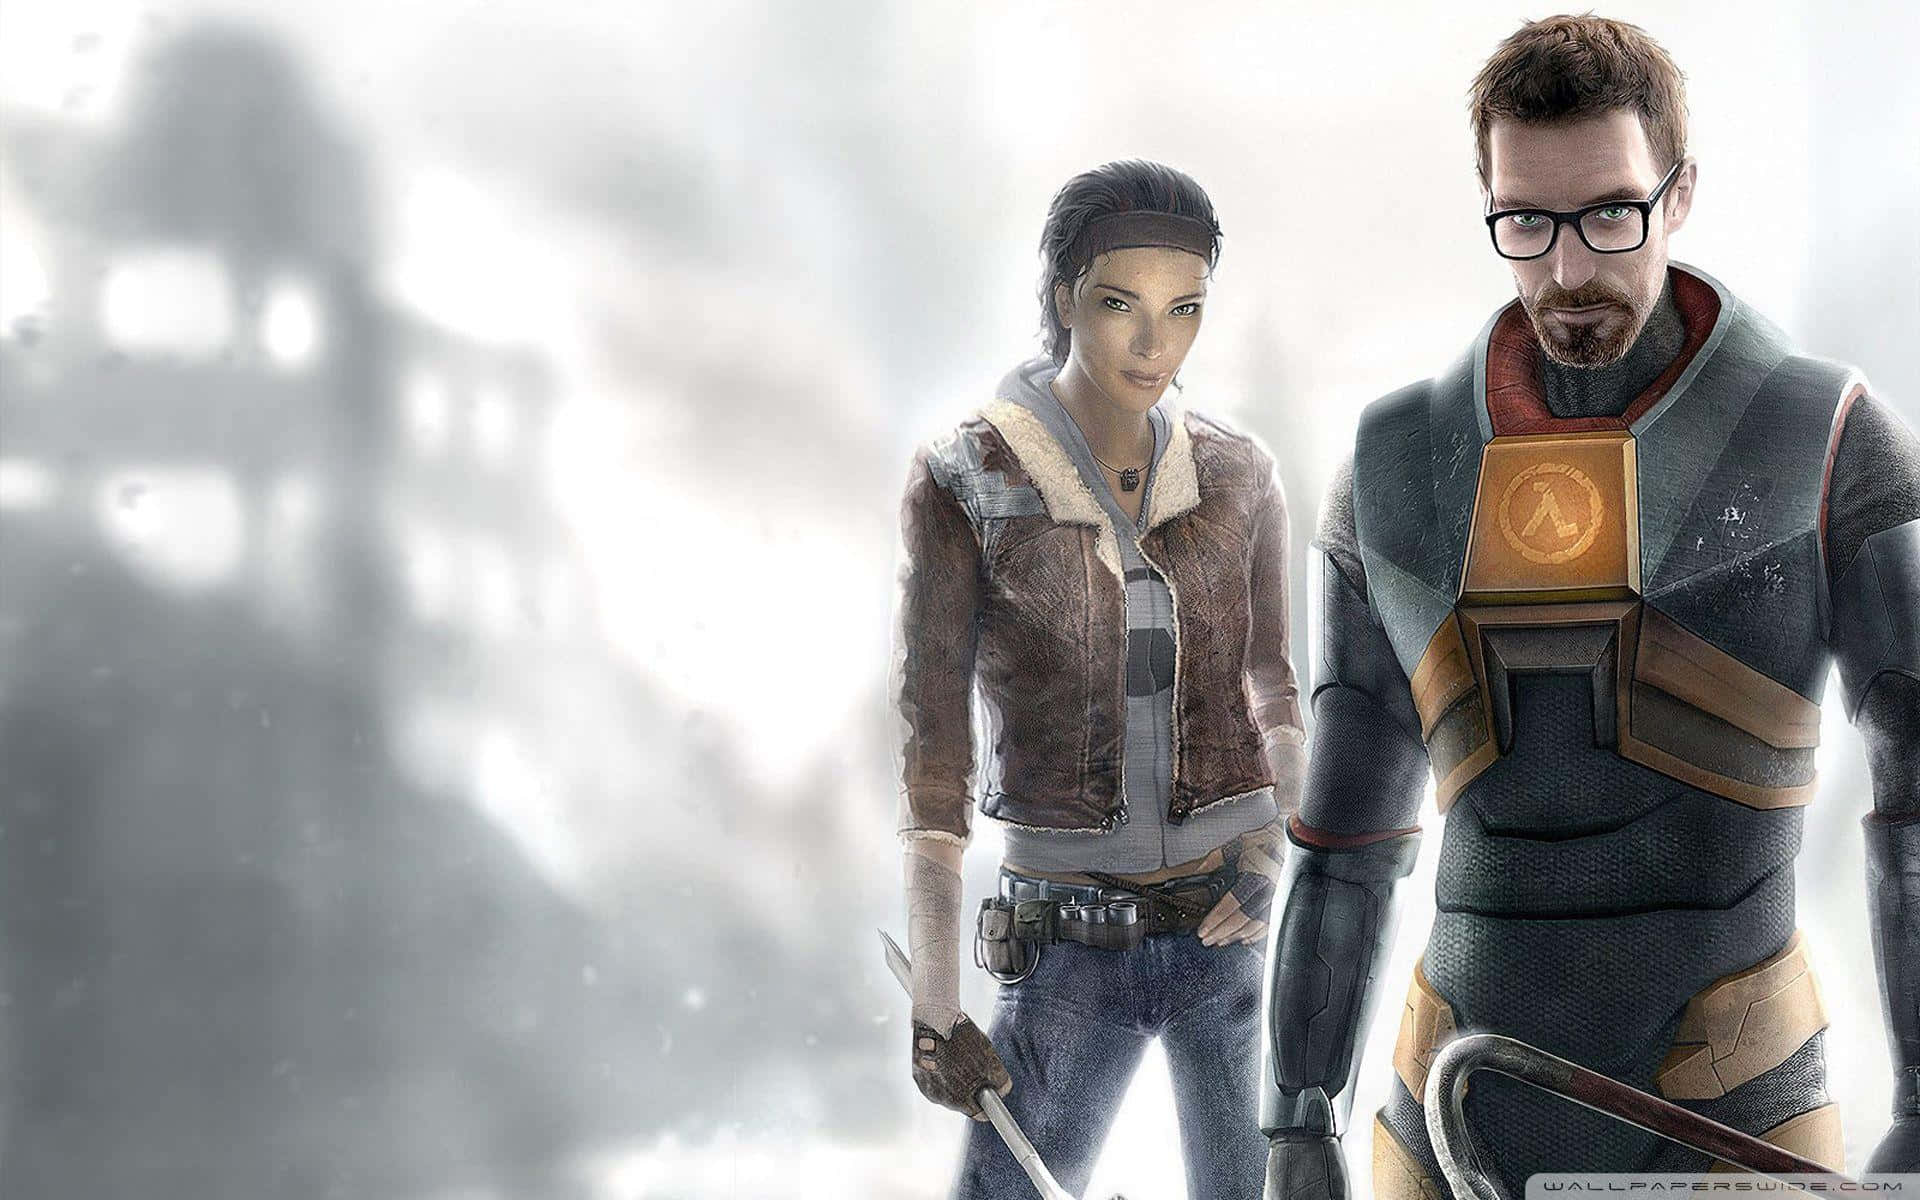 "How will you face your fight in the dystopian world of Half-Life 2?" Wallpaper